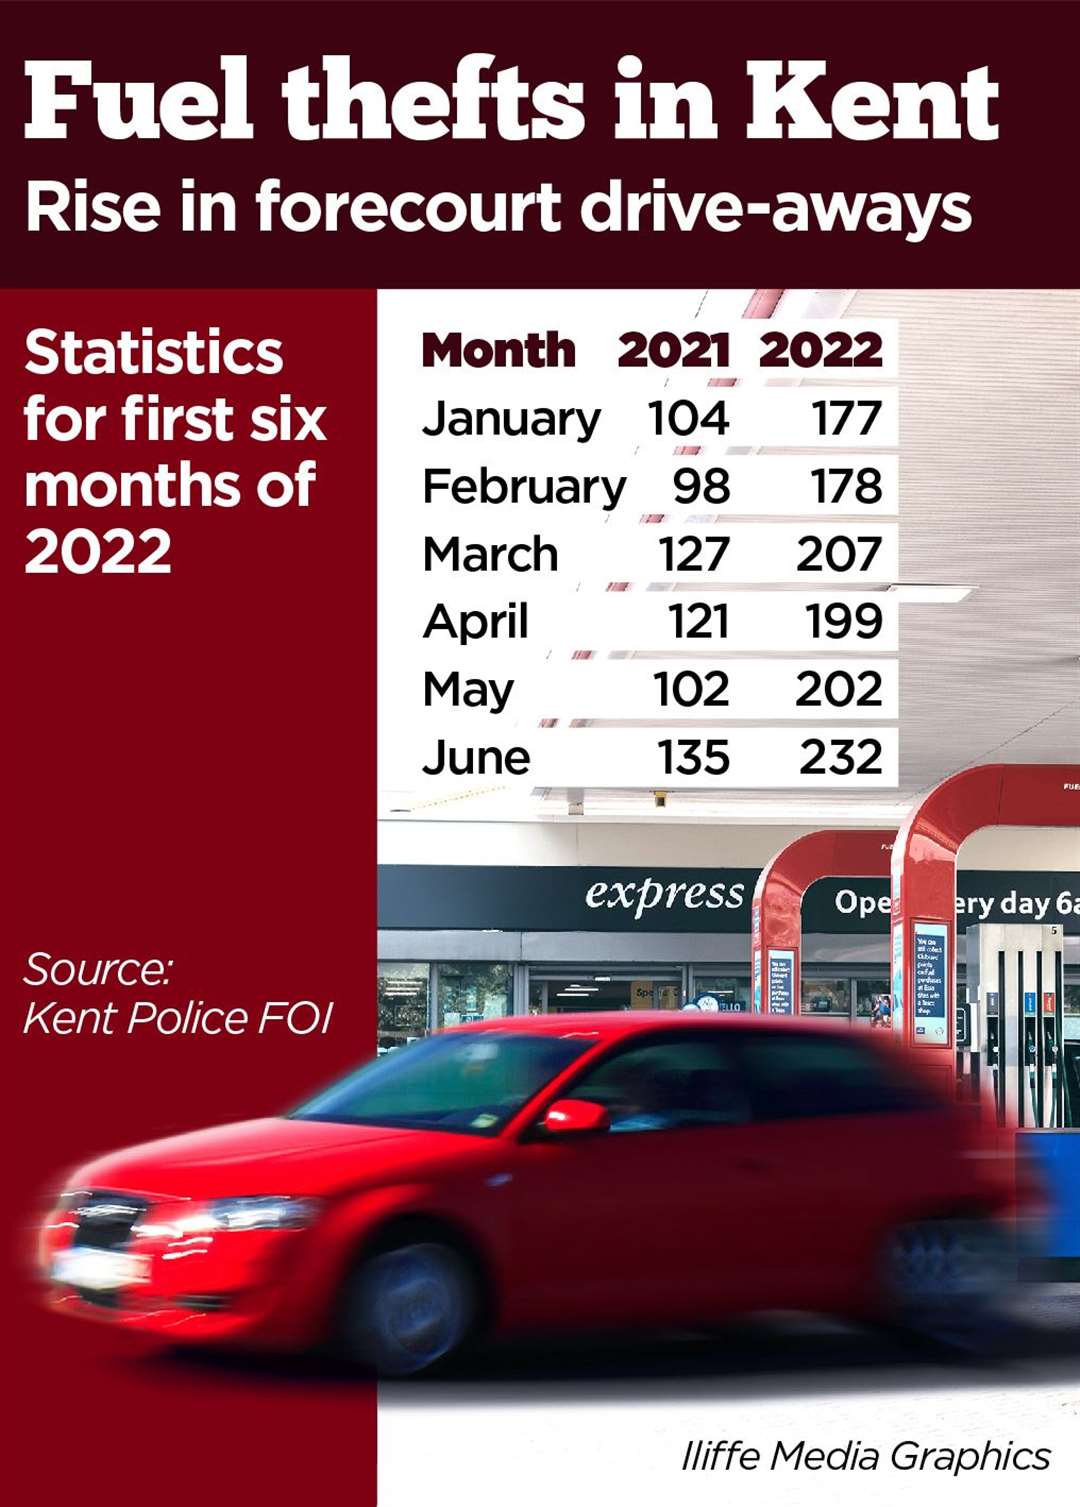 Fuel thefts have risen by 75% in 2022